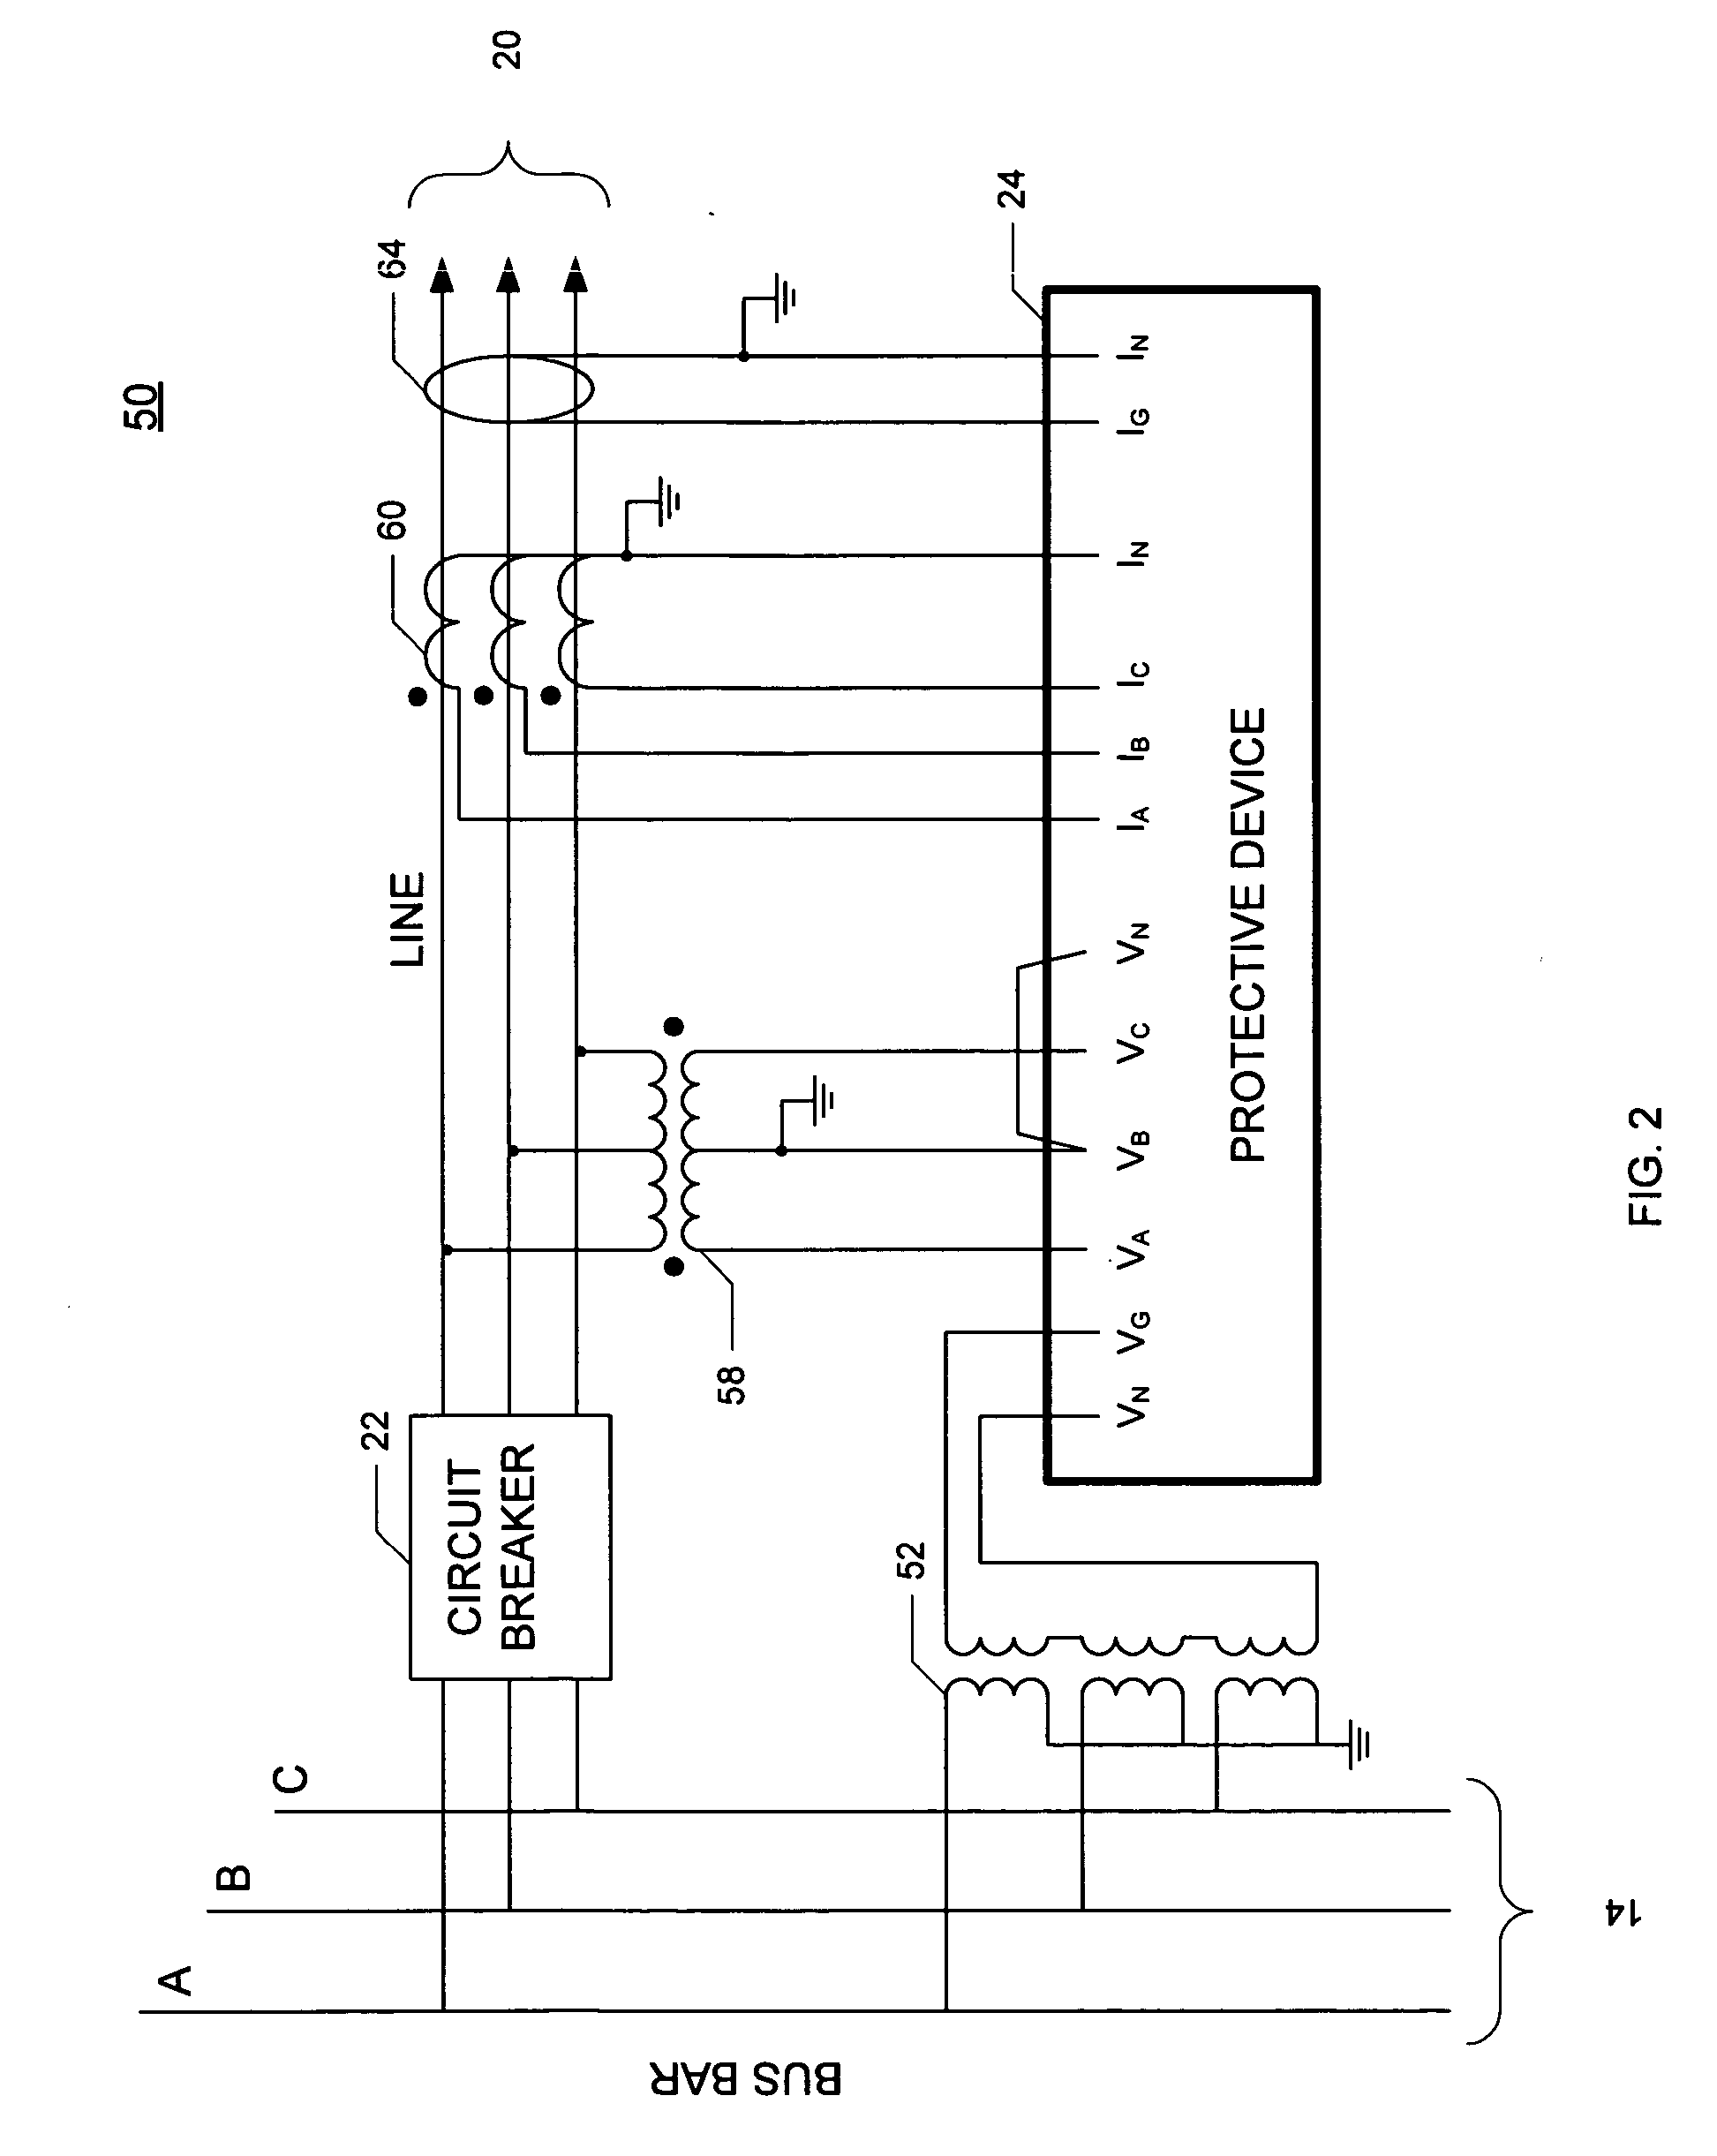 Apparatus and method for determining a faulted phase of a three-phase ungrounded power system